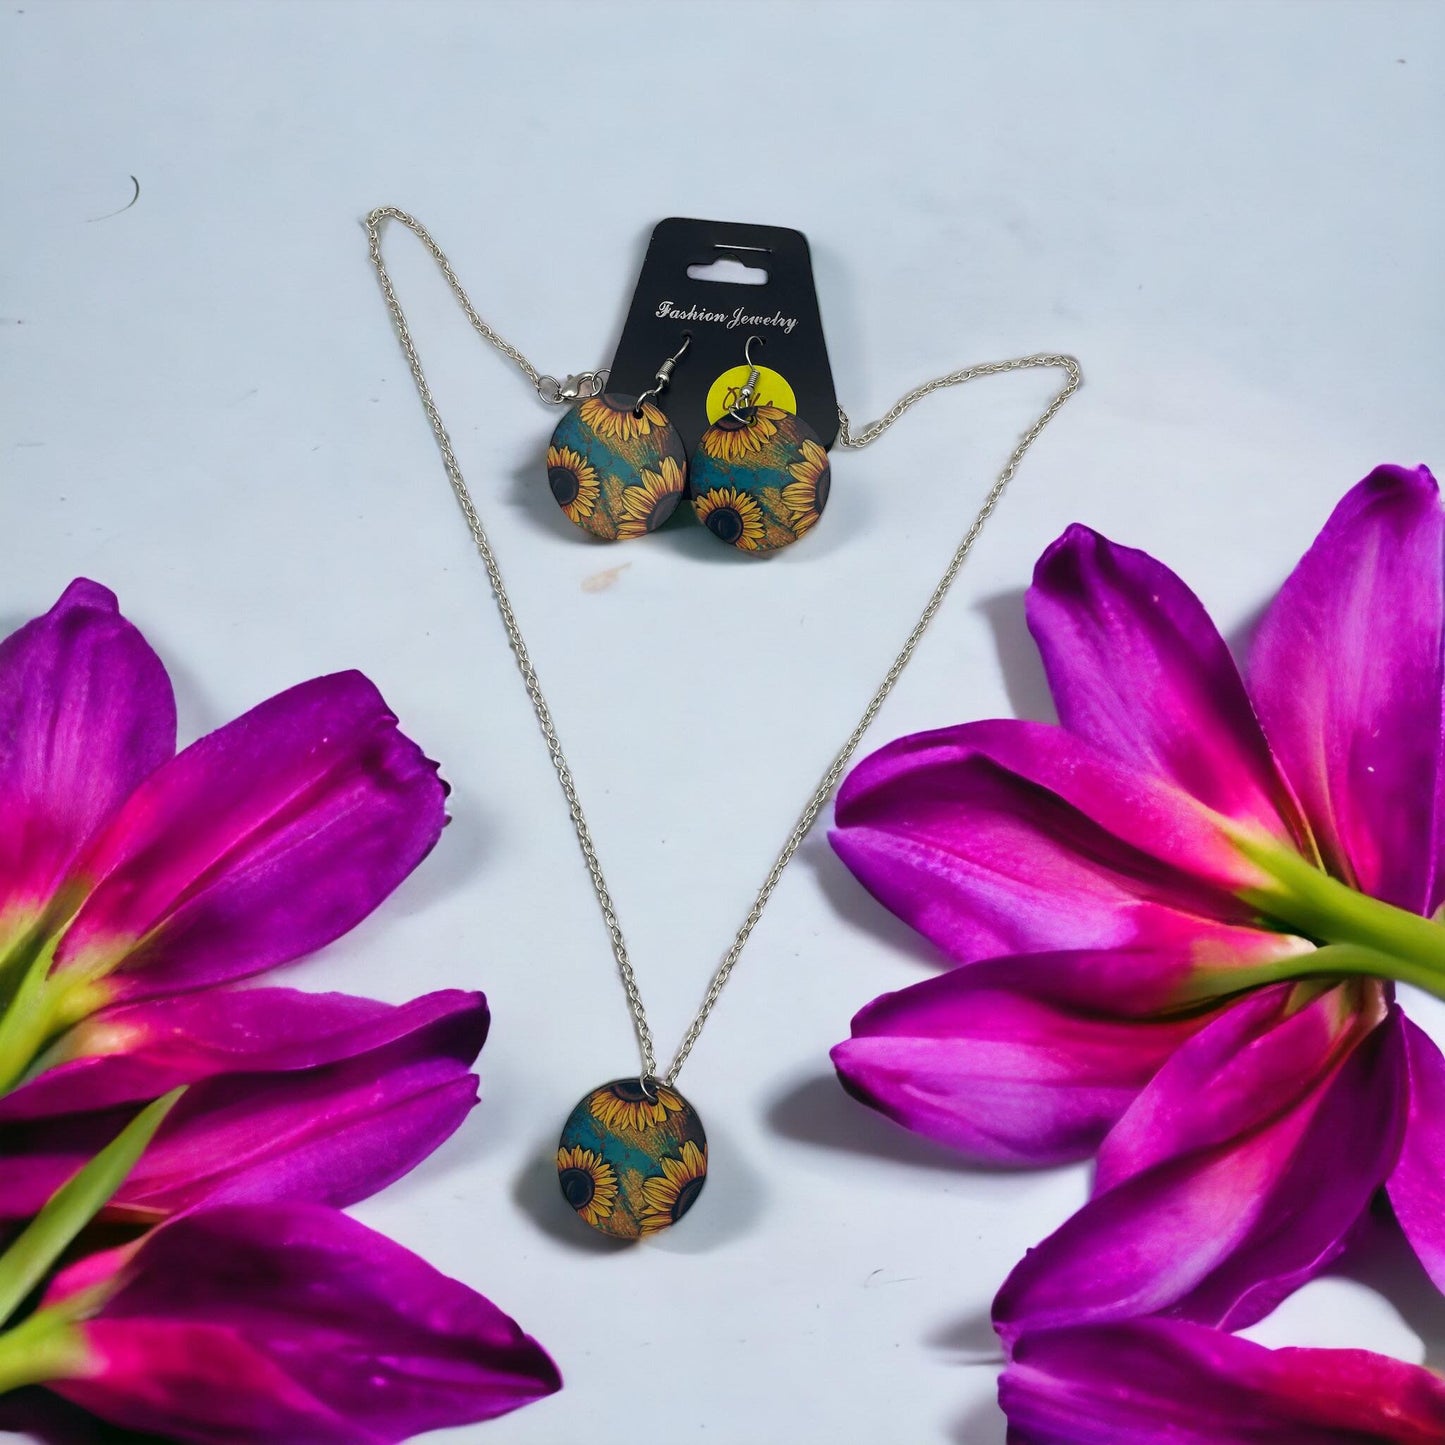 Handmade Sublimation Sunflower Necklace and Earrings Set